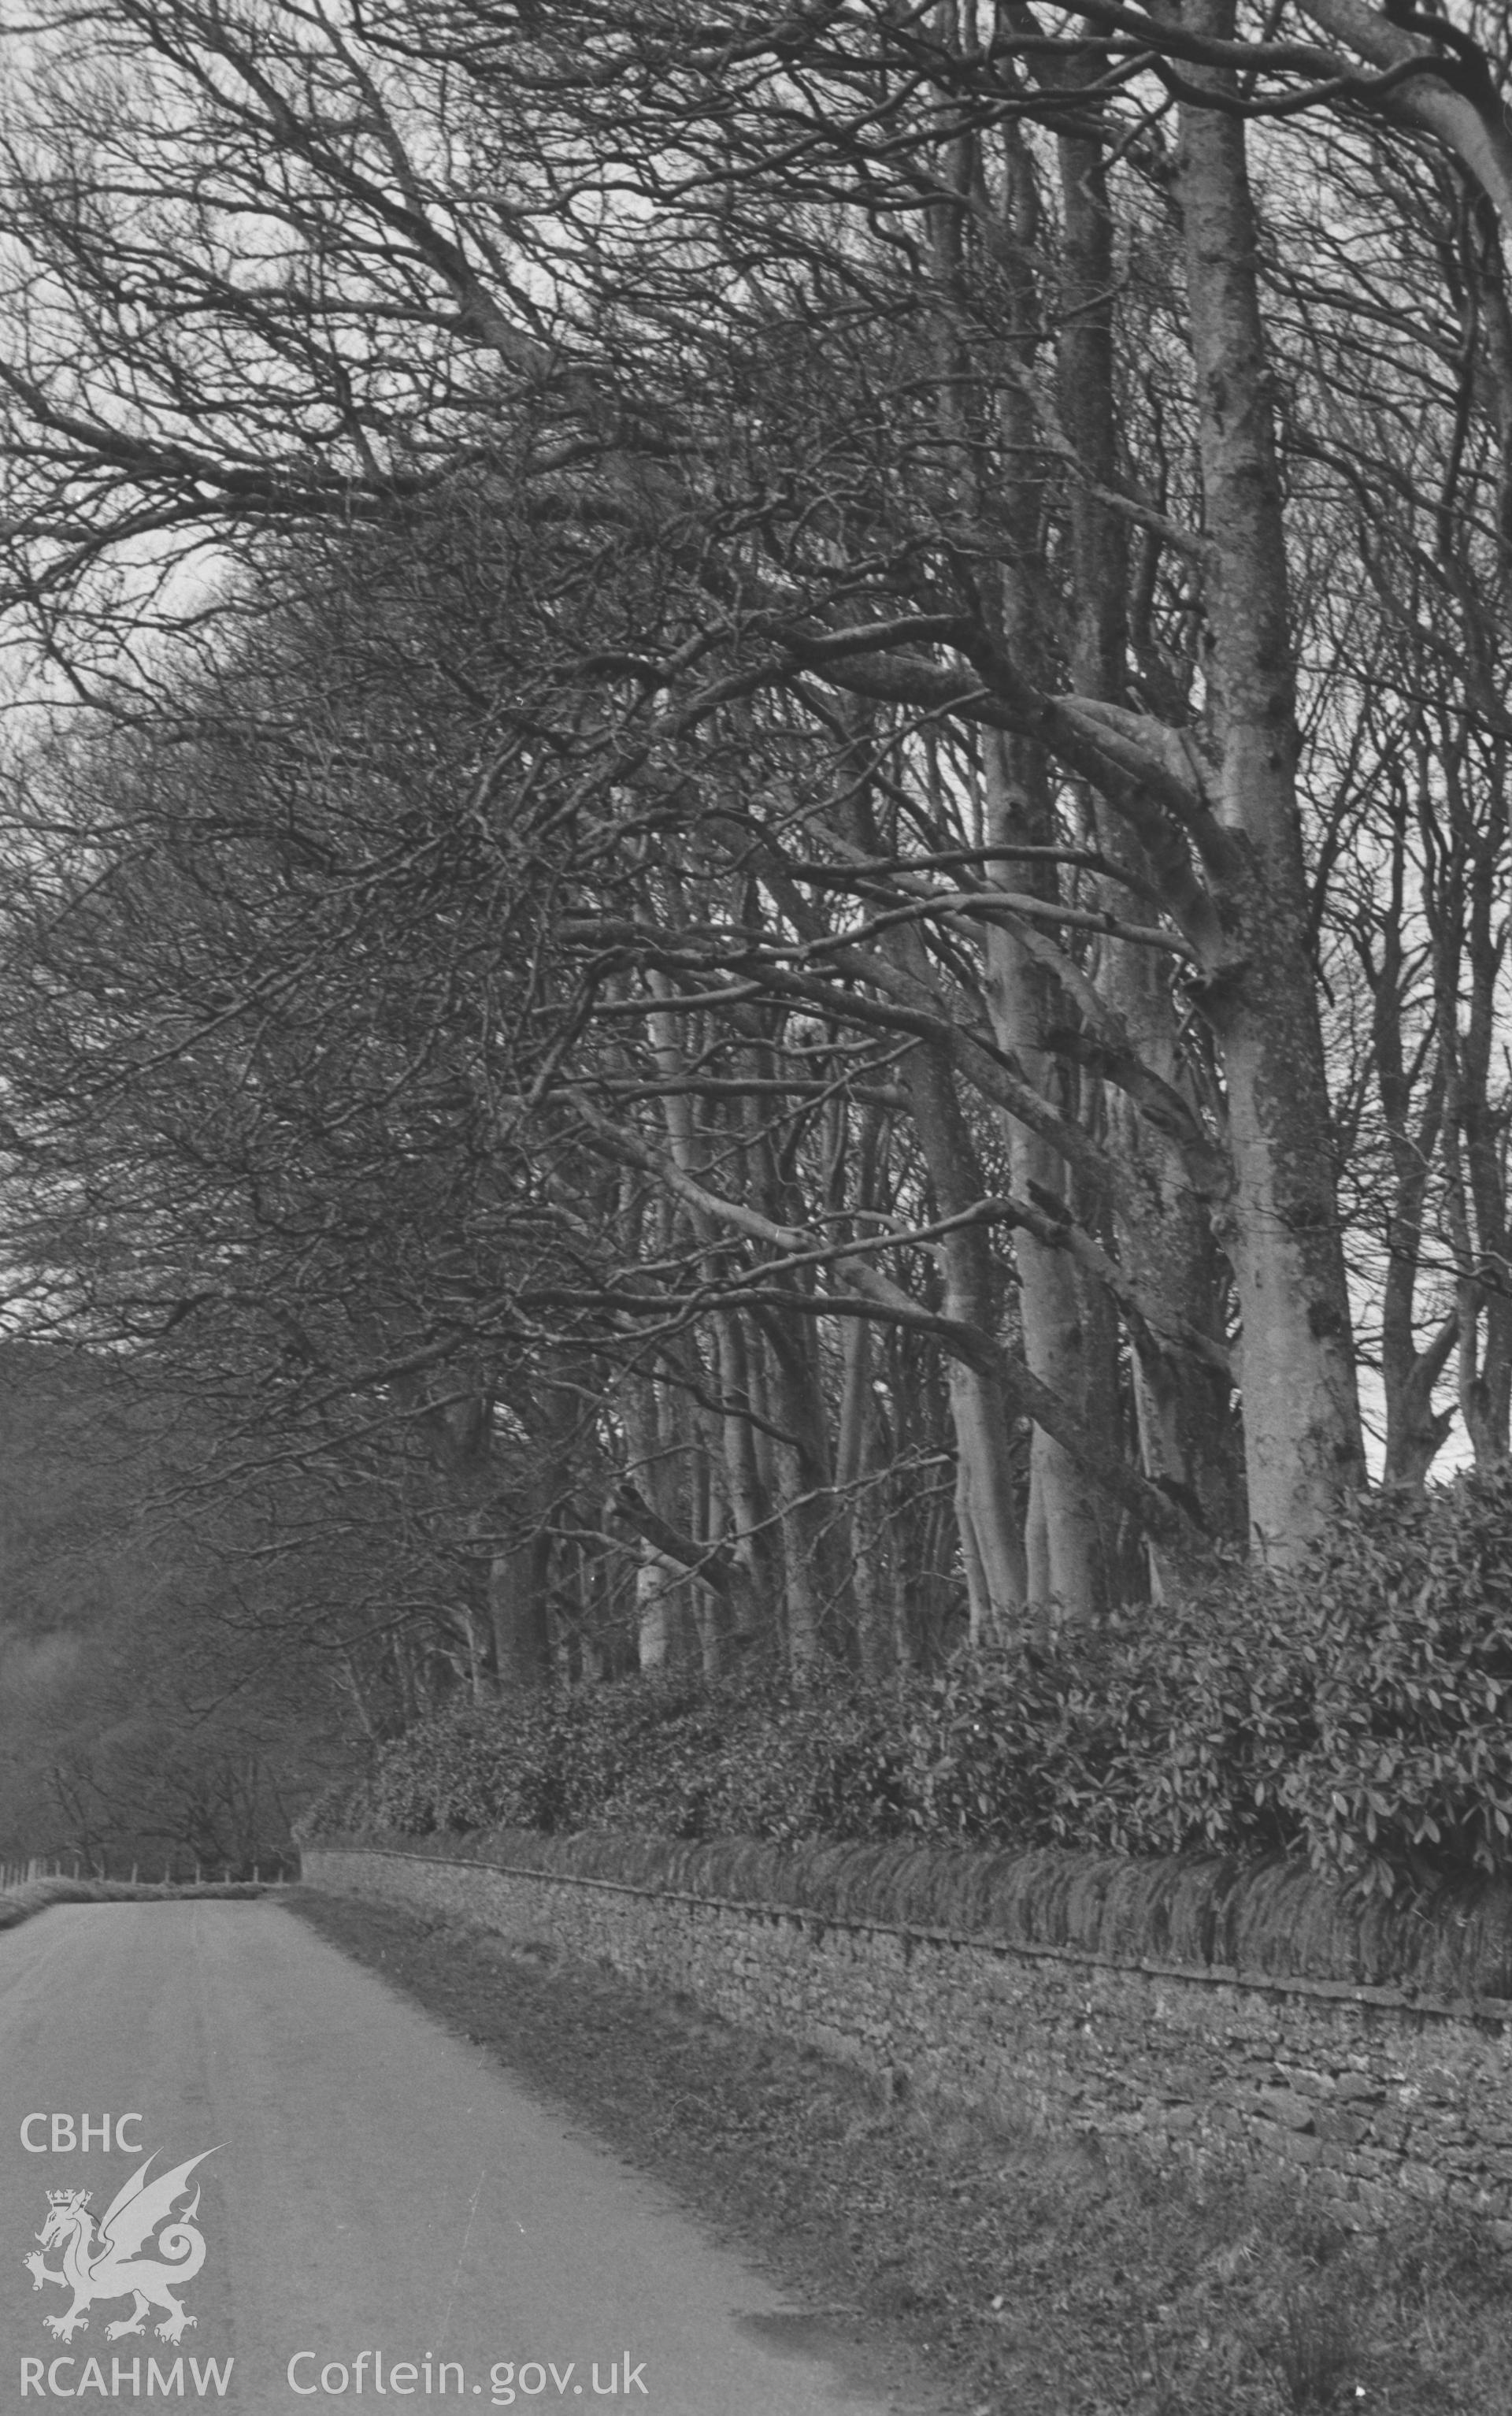 Digital copy of black and white negative showing beech trees behind the wall of Trawscoed Estate on the road to Llanafan. Photographed by Arthur O. Chater on 17th January 1968 looking north west from Grid Reference SN 671 727. [Felled shortly after visit.]